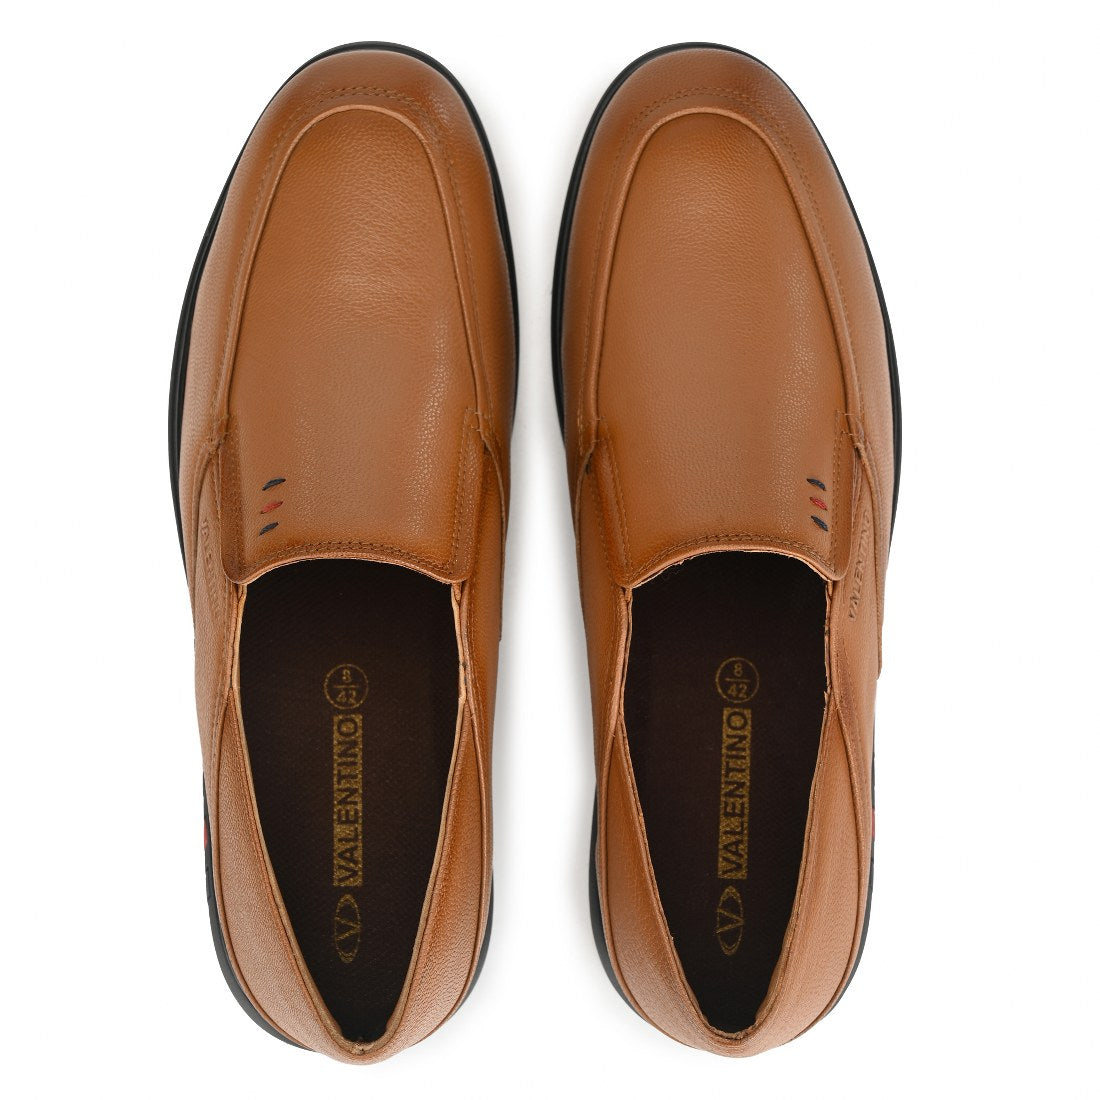 GERMAN-01 MEN LEATHER TAN CASUAL SLIP ON MOCCASSINS